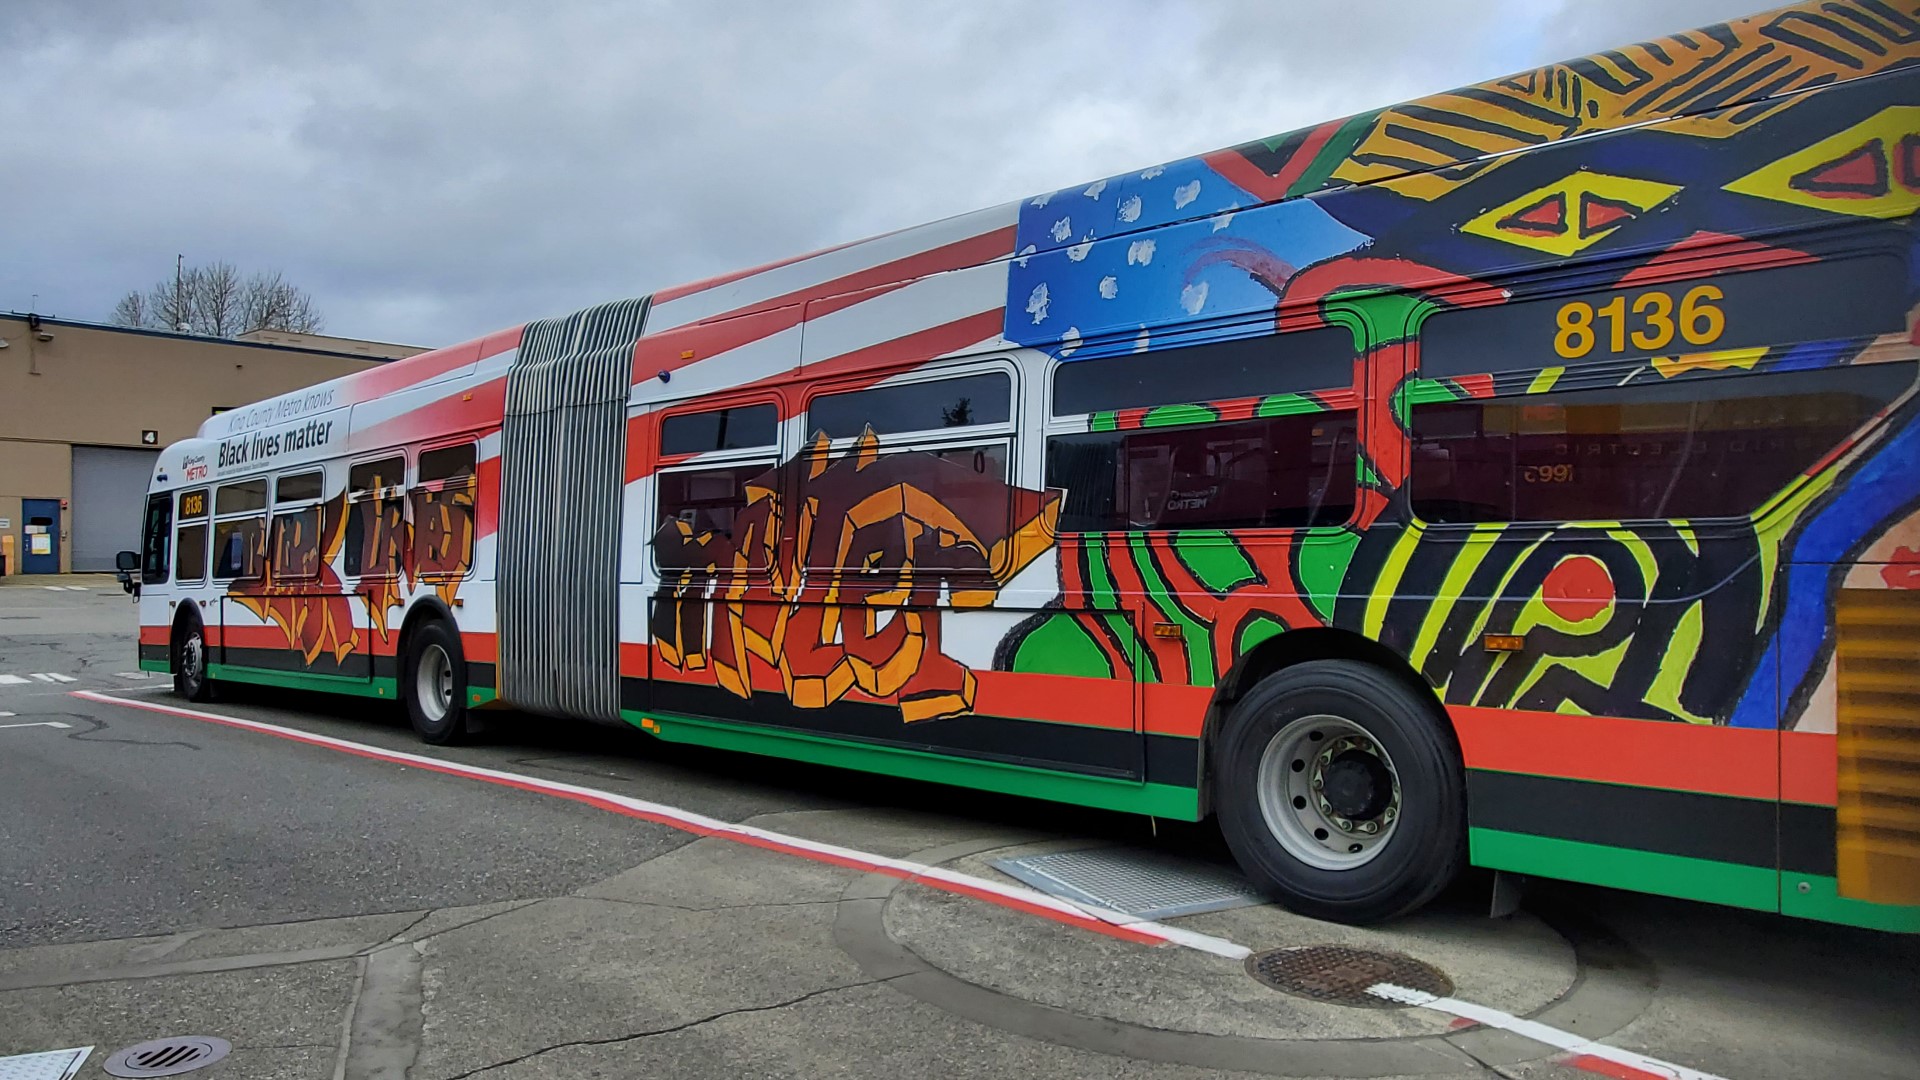 Artwork centered around the Black Lives Matter movement, designed by Metro employees, is now displayed on hundreds of buses across the county.